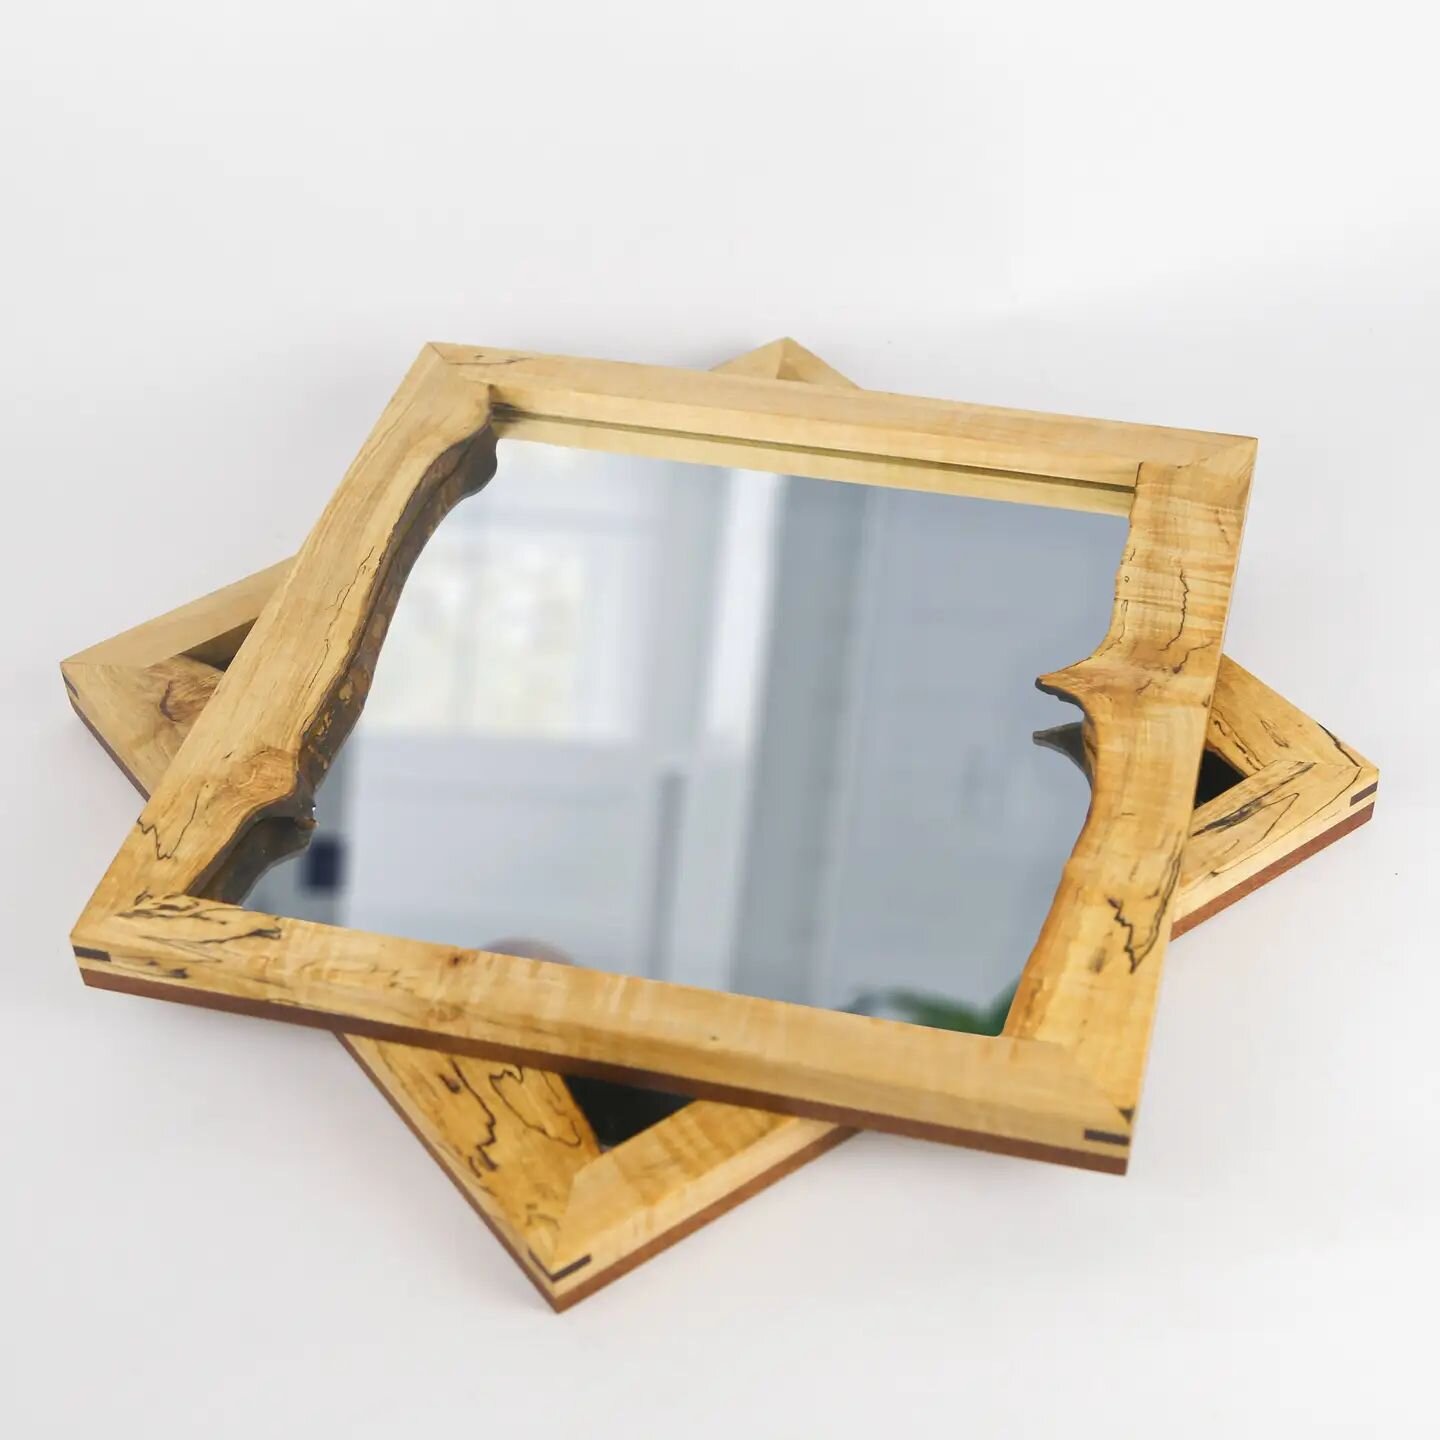 Mirrors are fun, especially with a live edge.